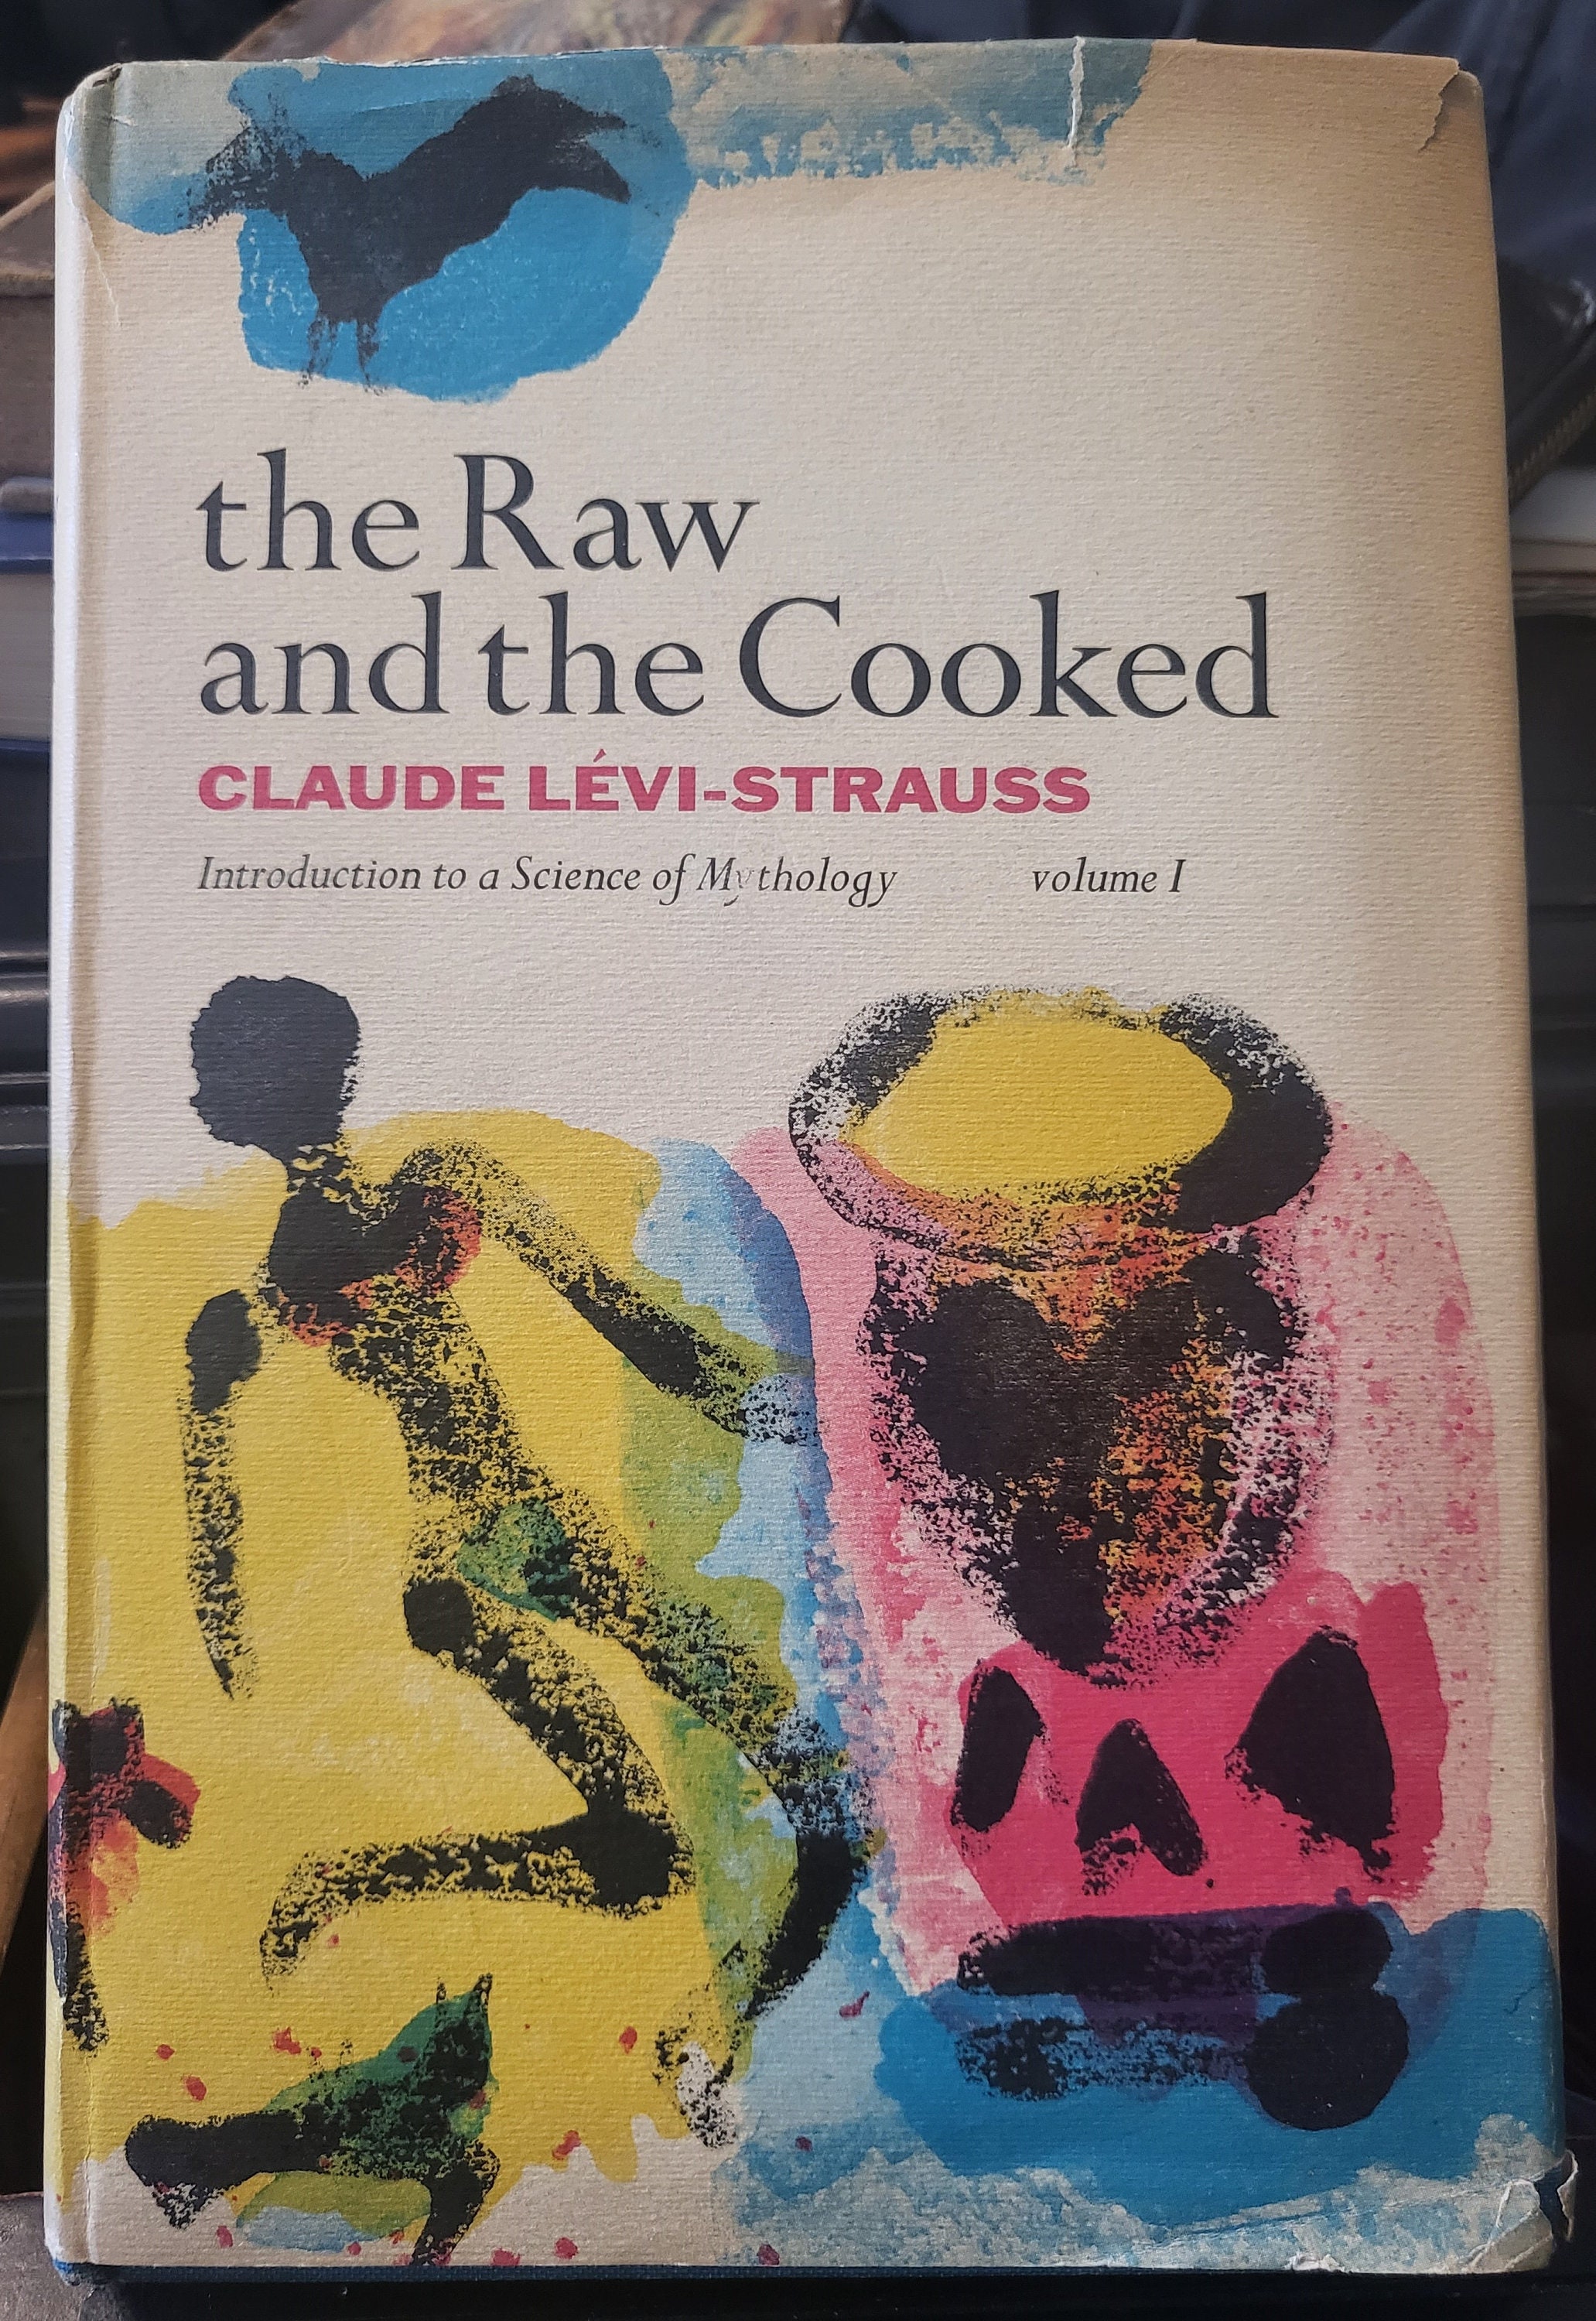 respons efter det vokal The Raw and the Cooked Vol. 1 by Claude Levi-strauss Stated - Etsy